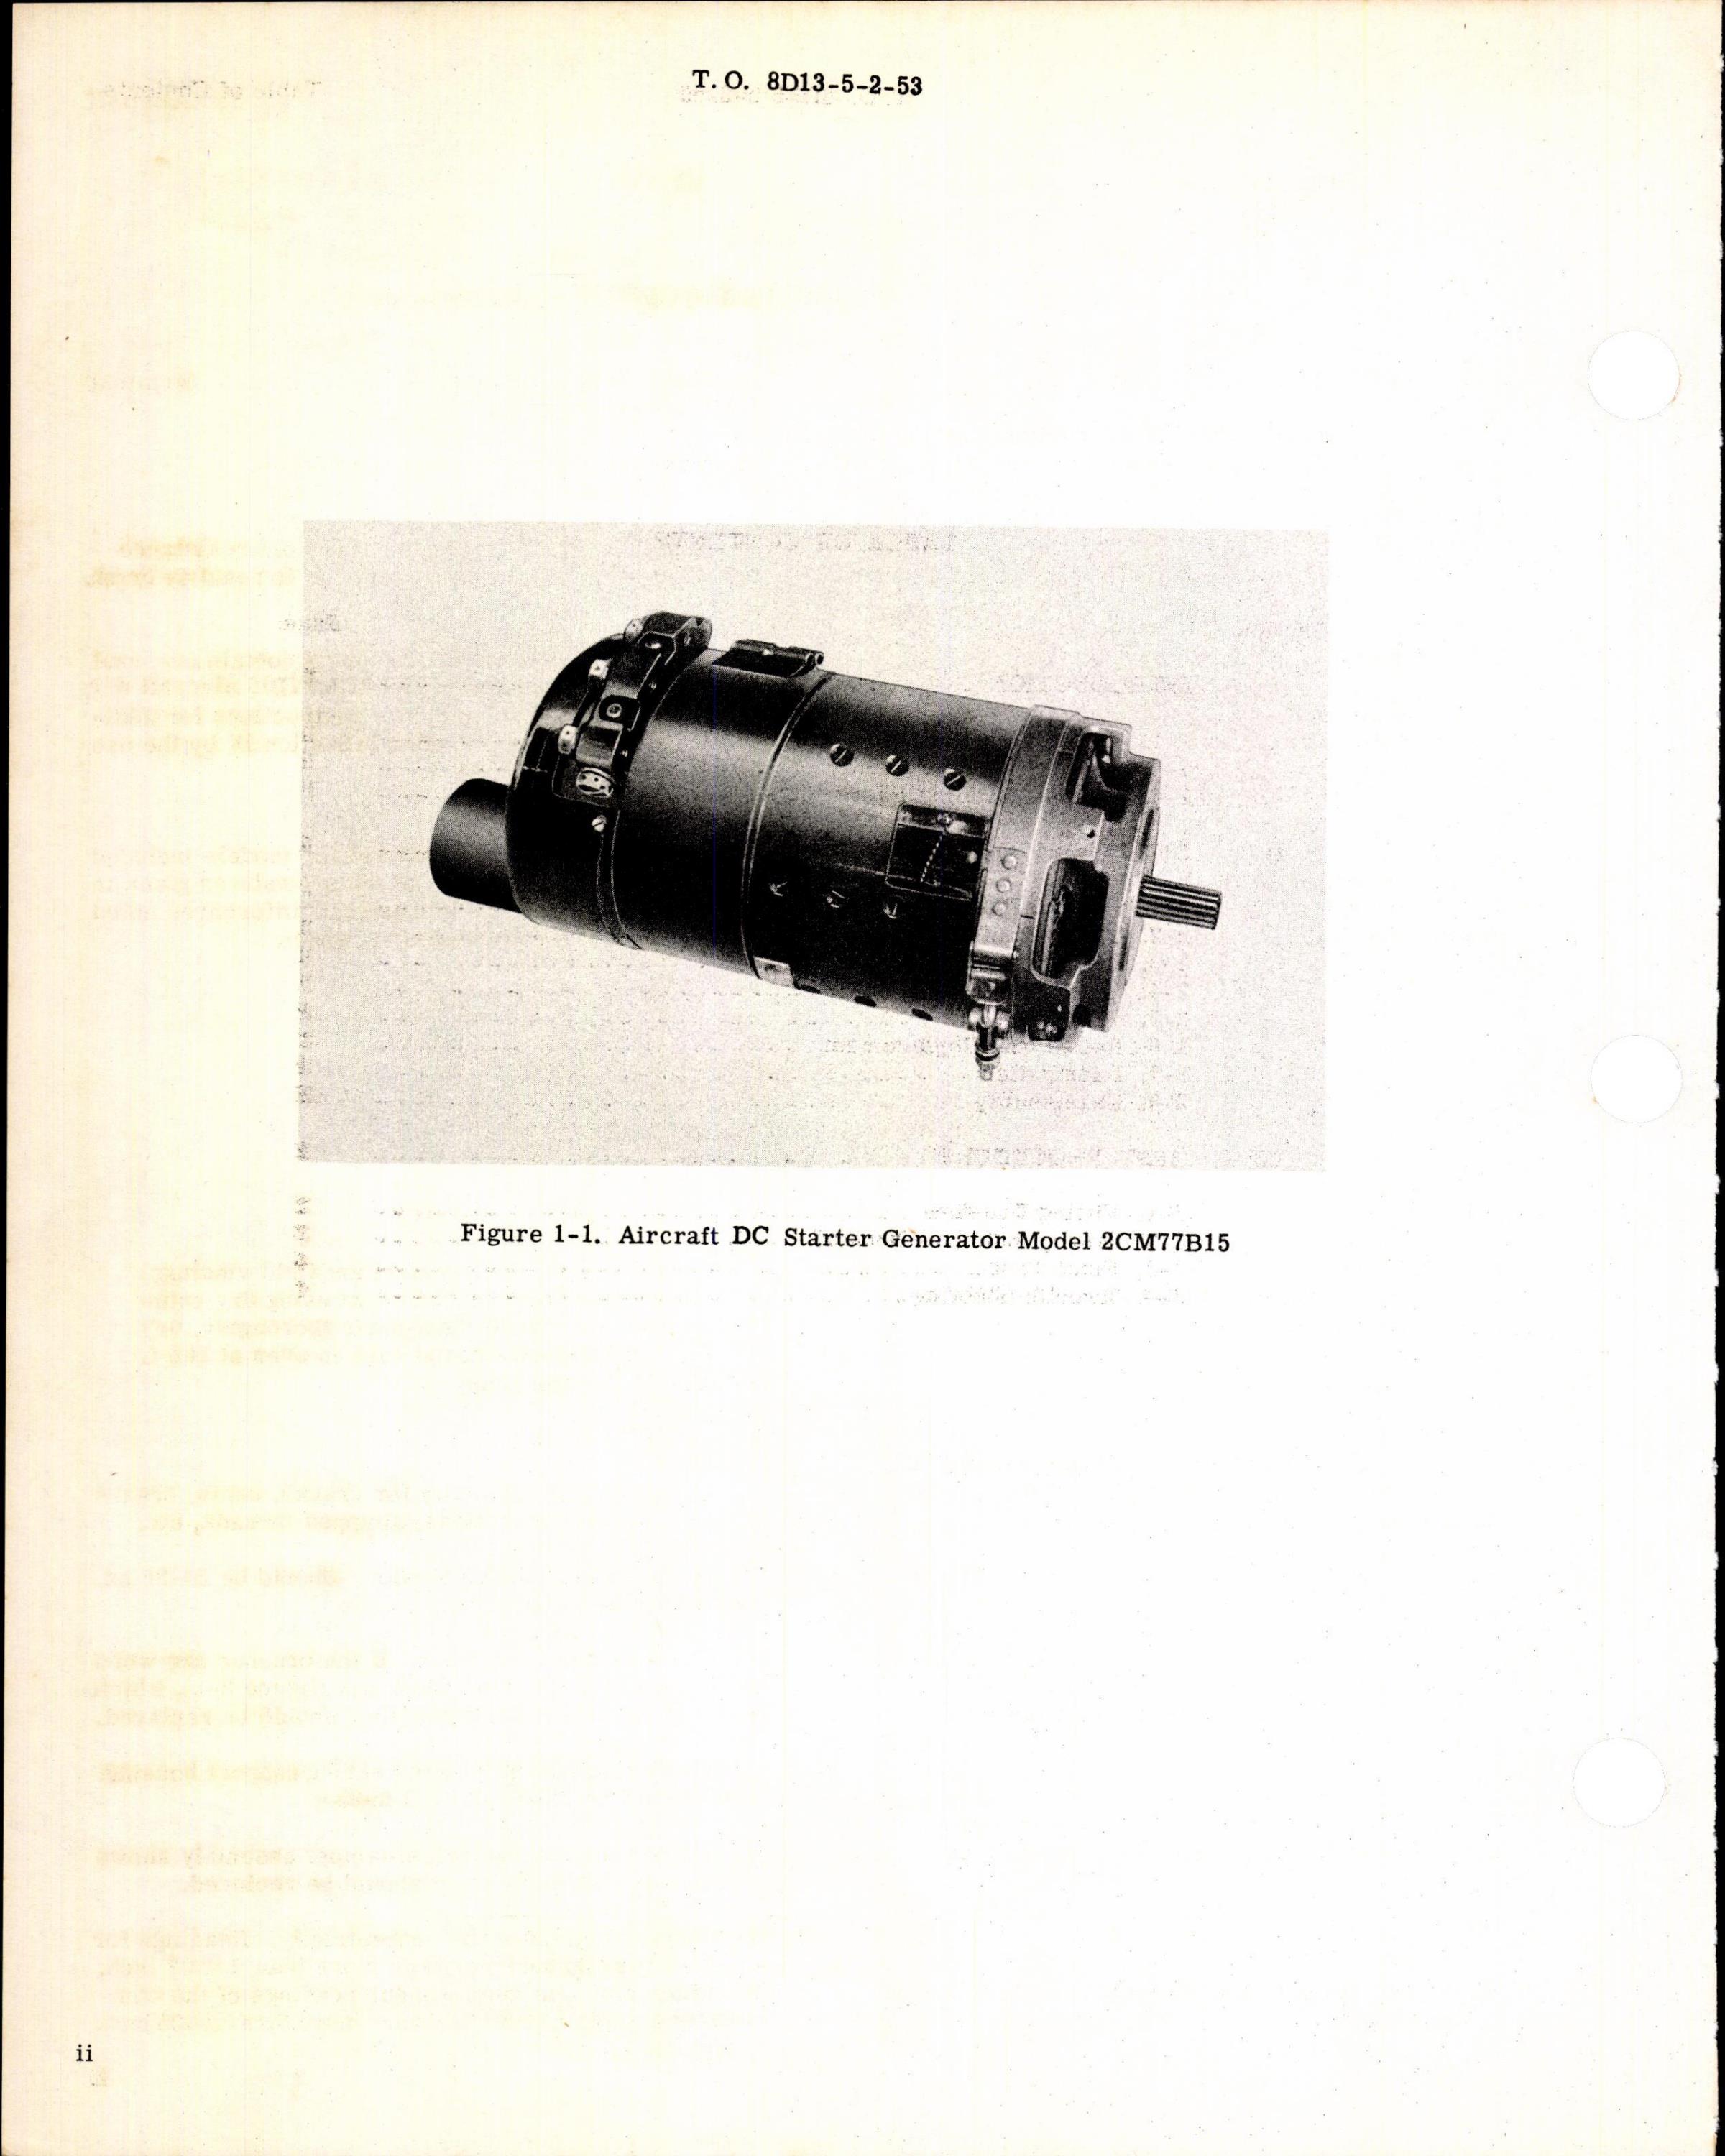 Sample page 4 from AirCorps Library document: Instructions for Aircraft DC Starter Generator, 2CM77B15